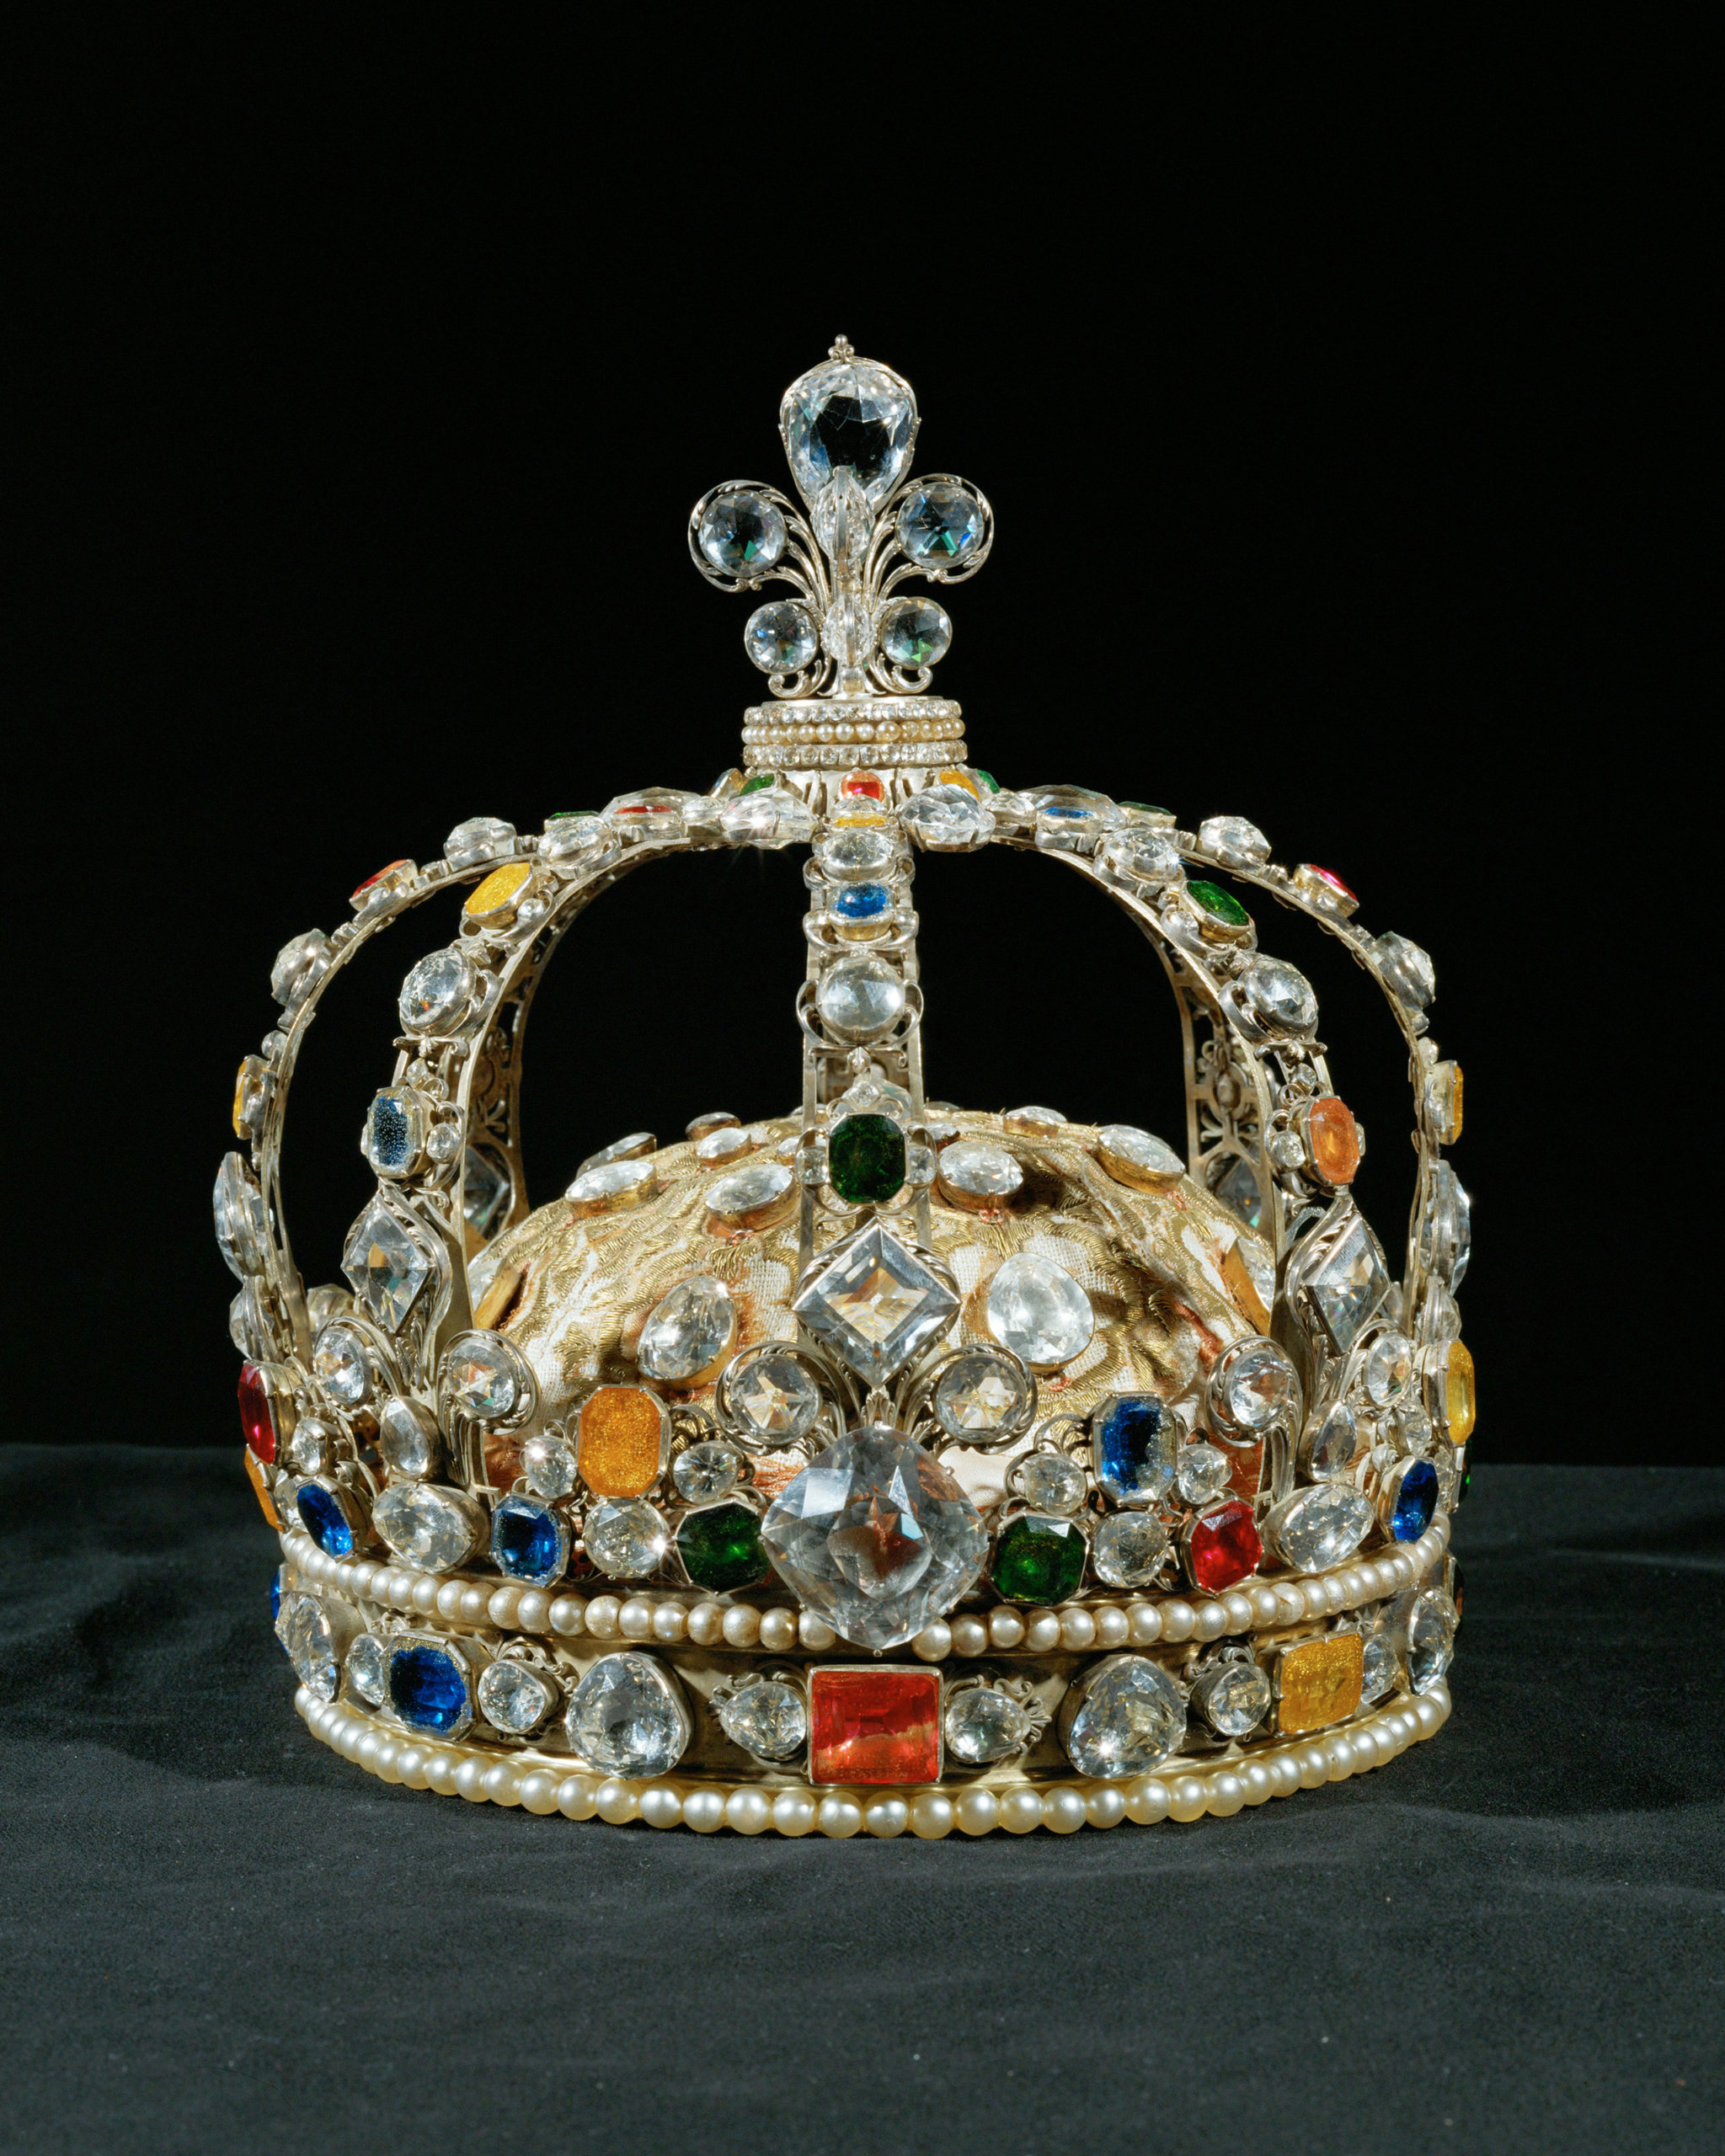 The Crown of Louis XV, embellished with Le Grand Mazarin diamond, sapphires, topazes, emeralds, rubies, and 2 rows of pearls 